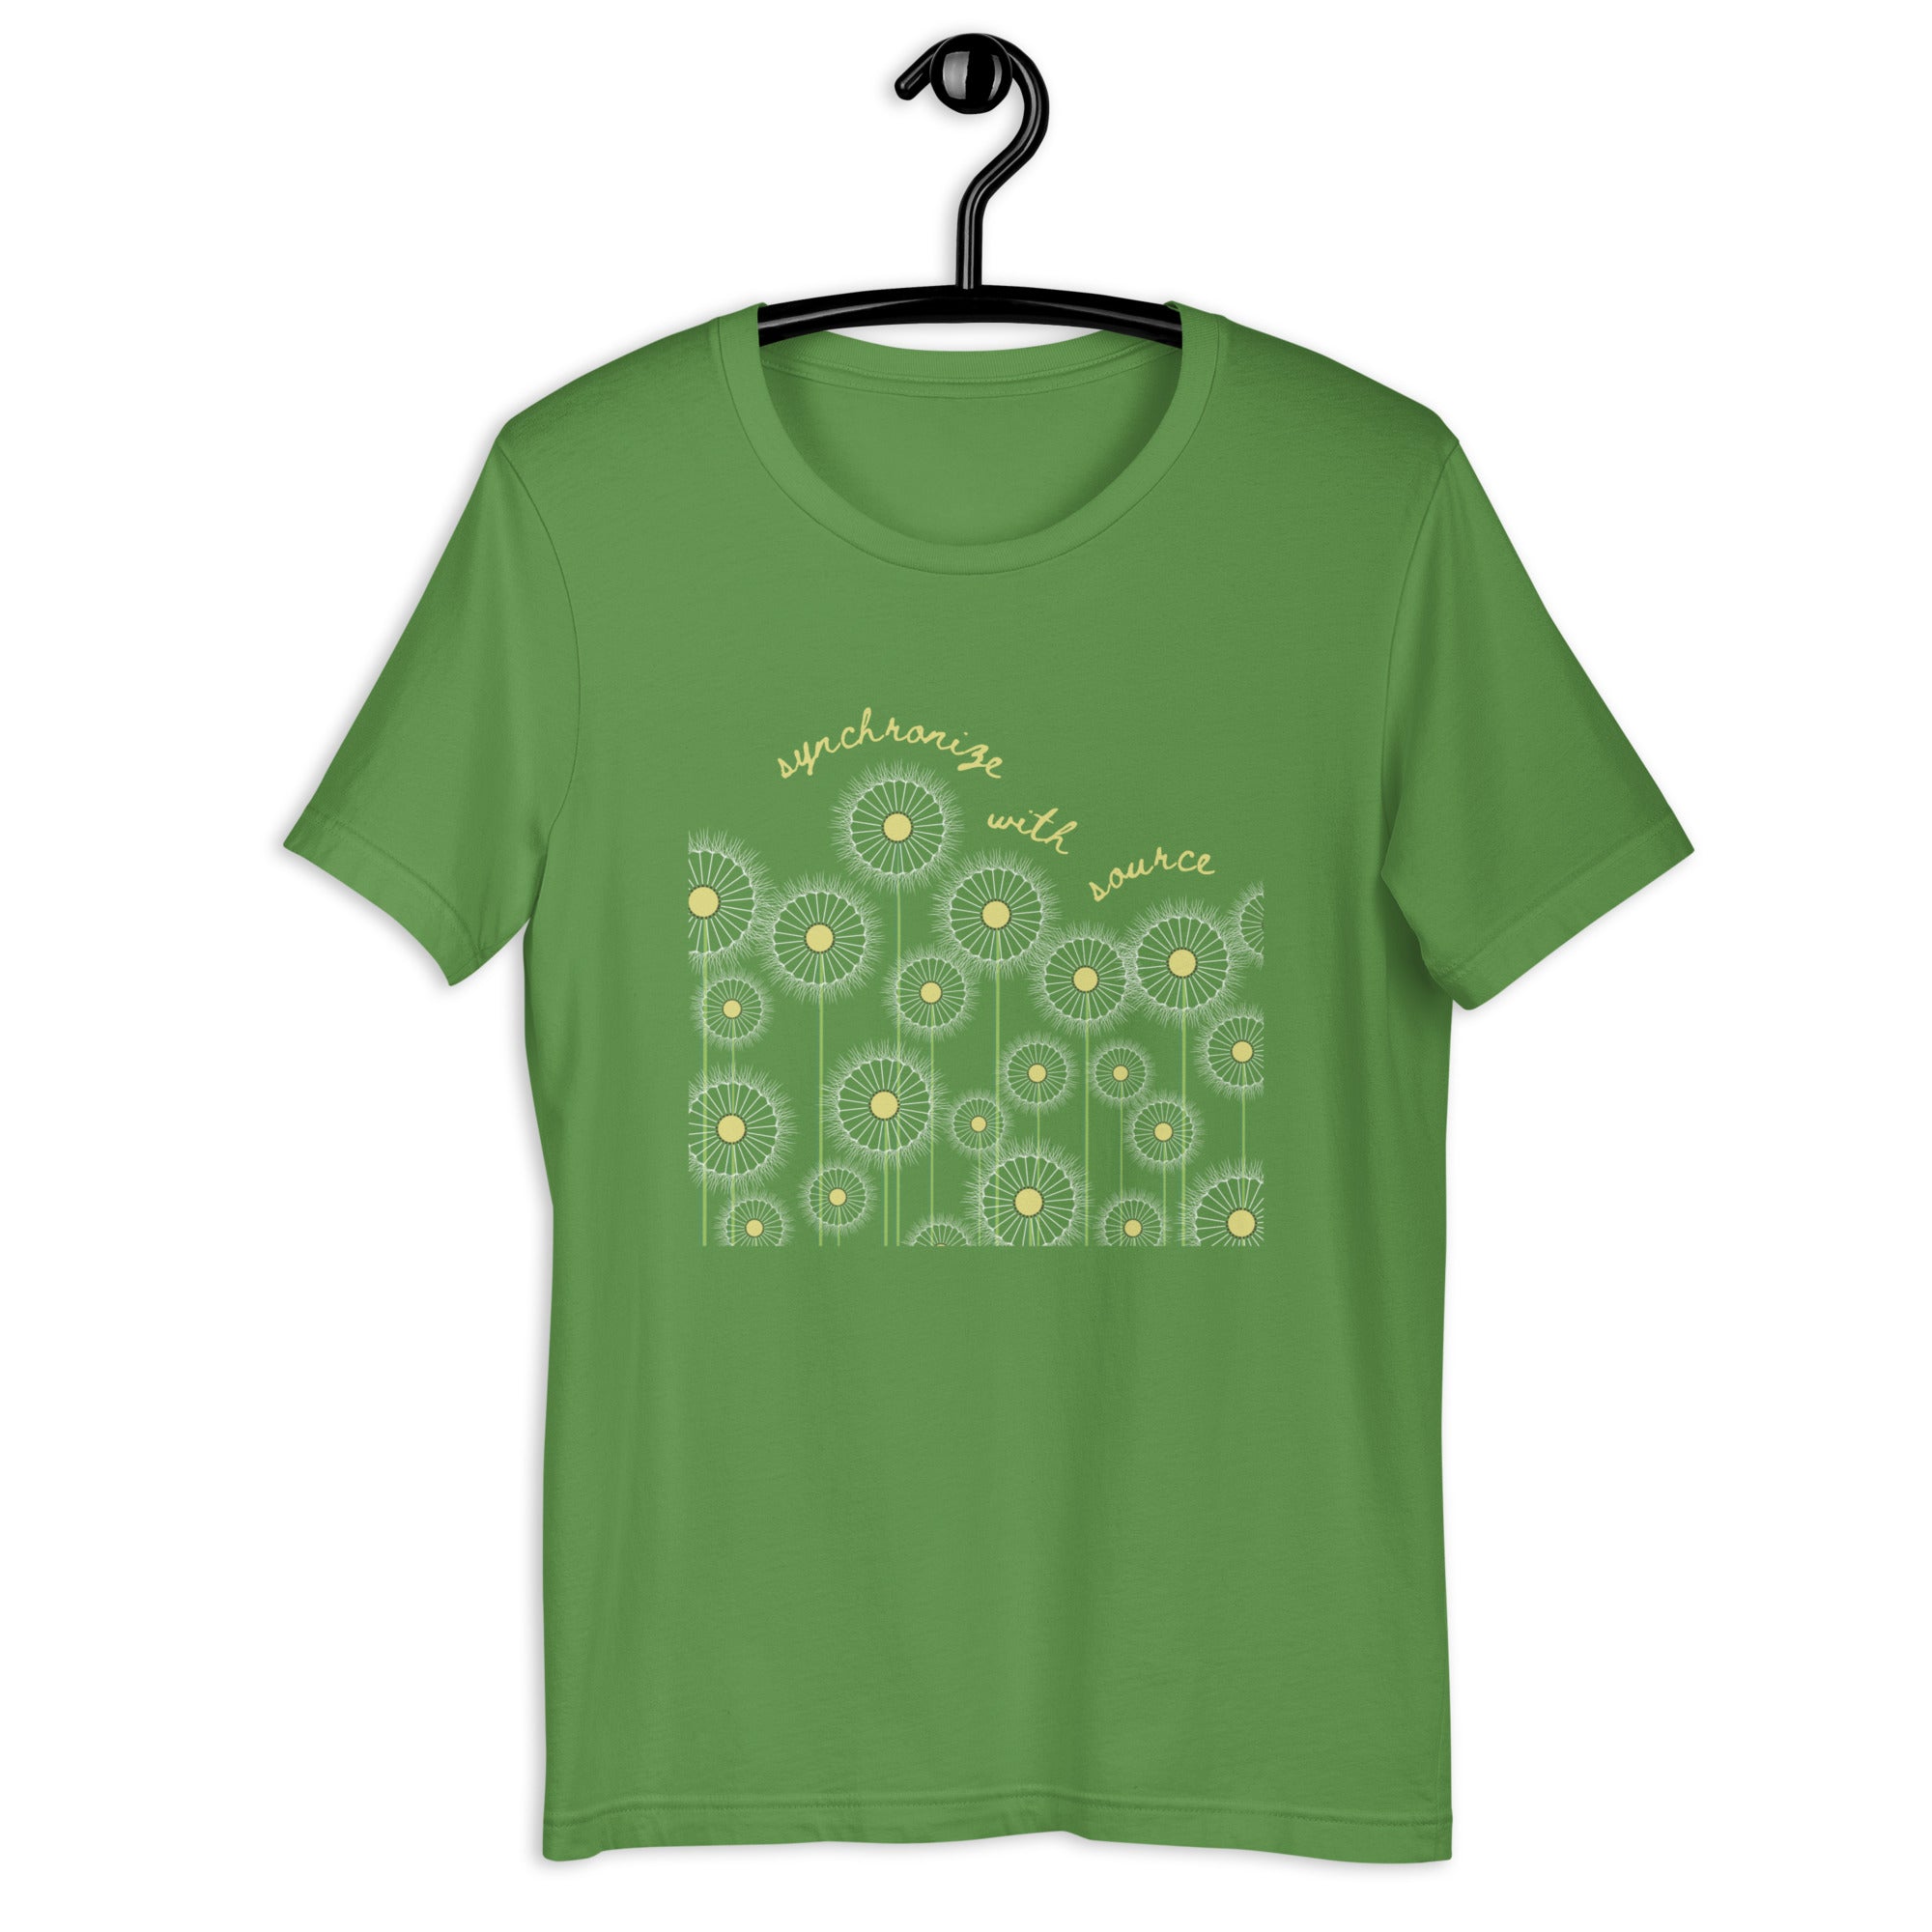 Synchronize with Source - Plus Size Graphic Tee